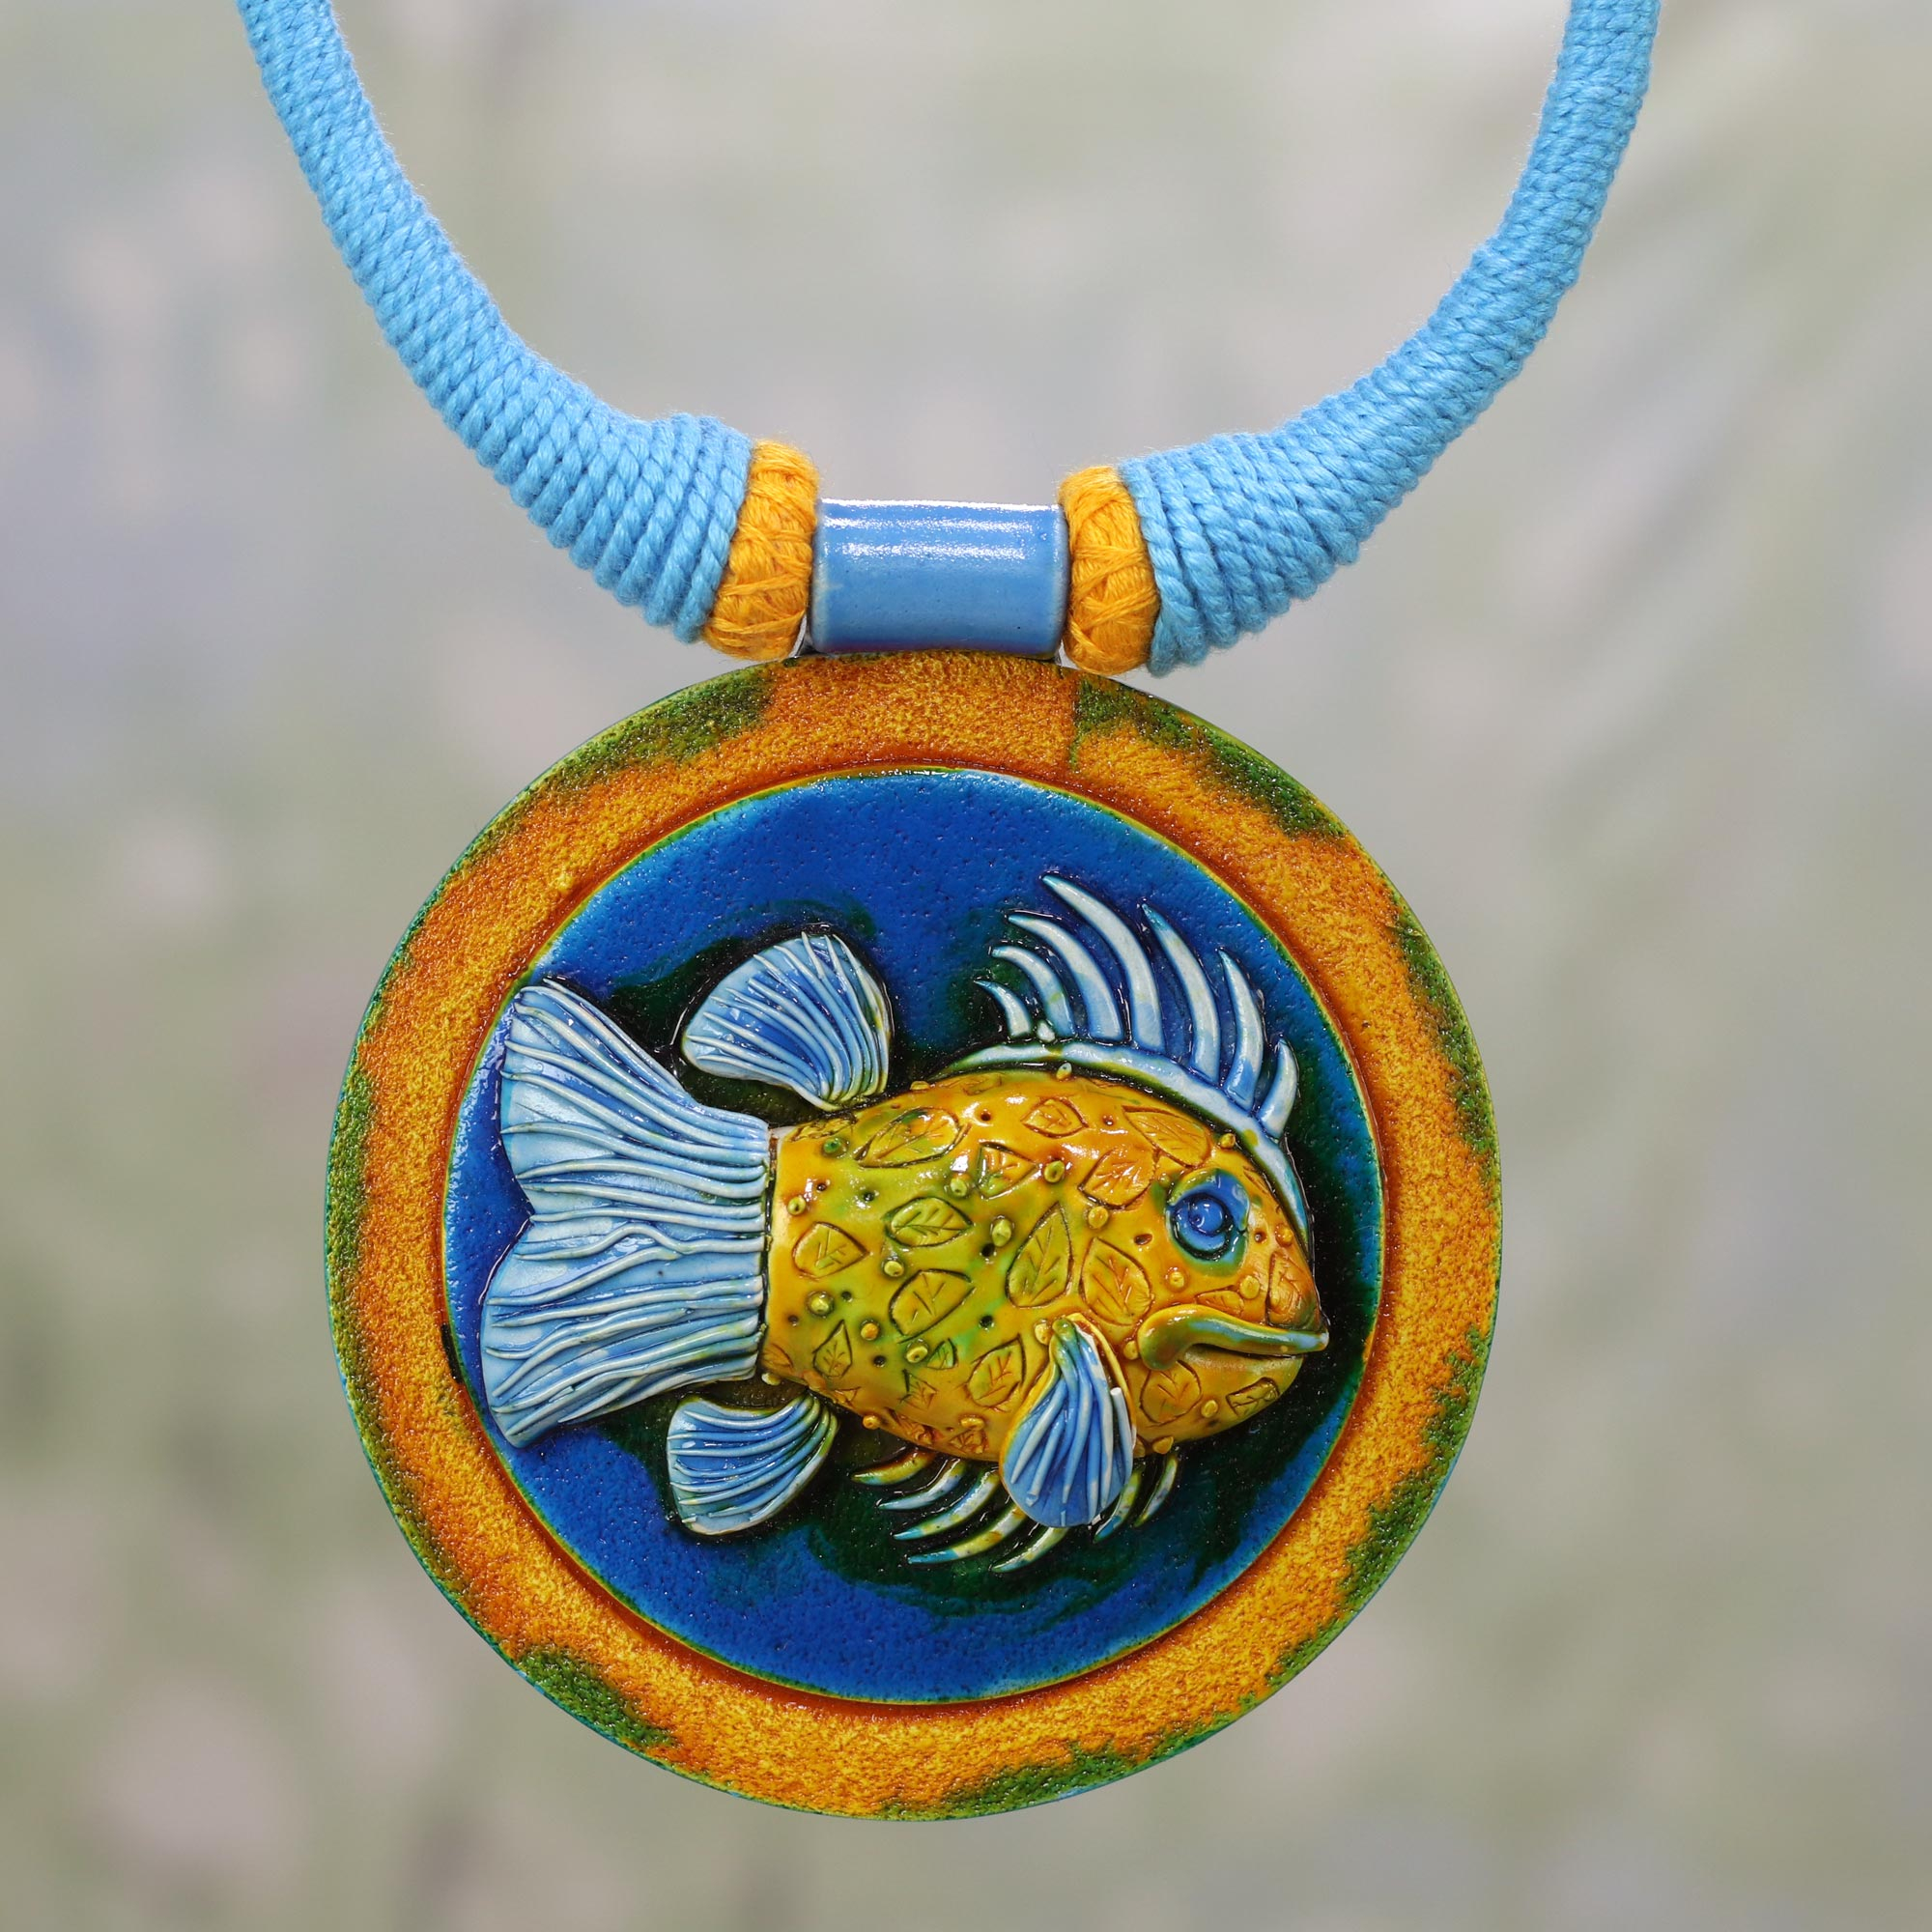 Ceramic and Cotton Fish Pendant Necklace in Blue from India - Blue Angler